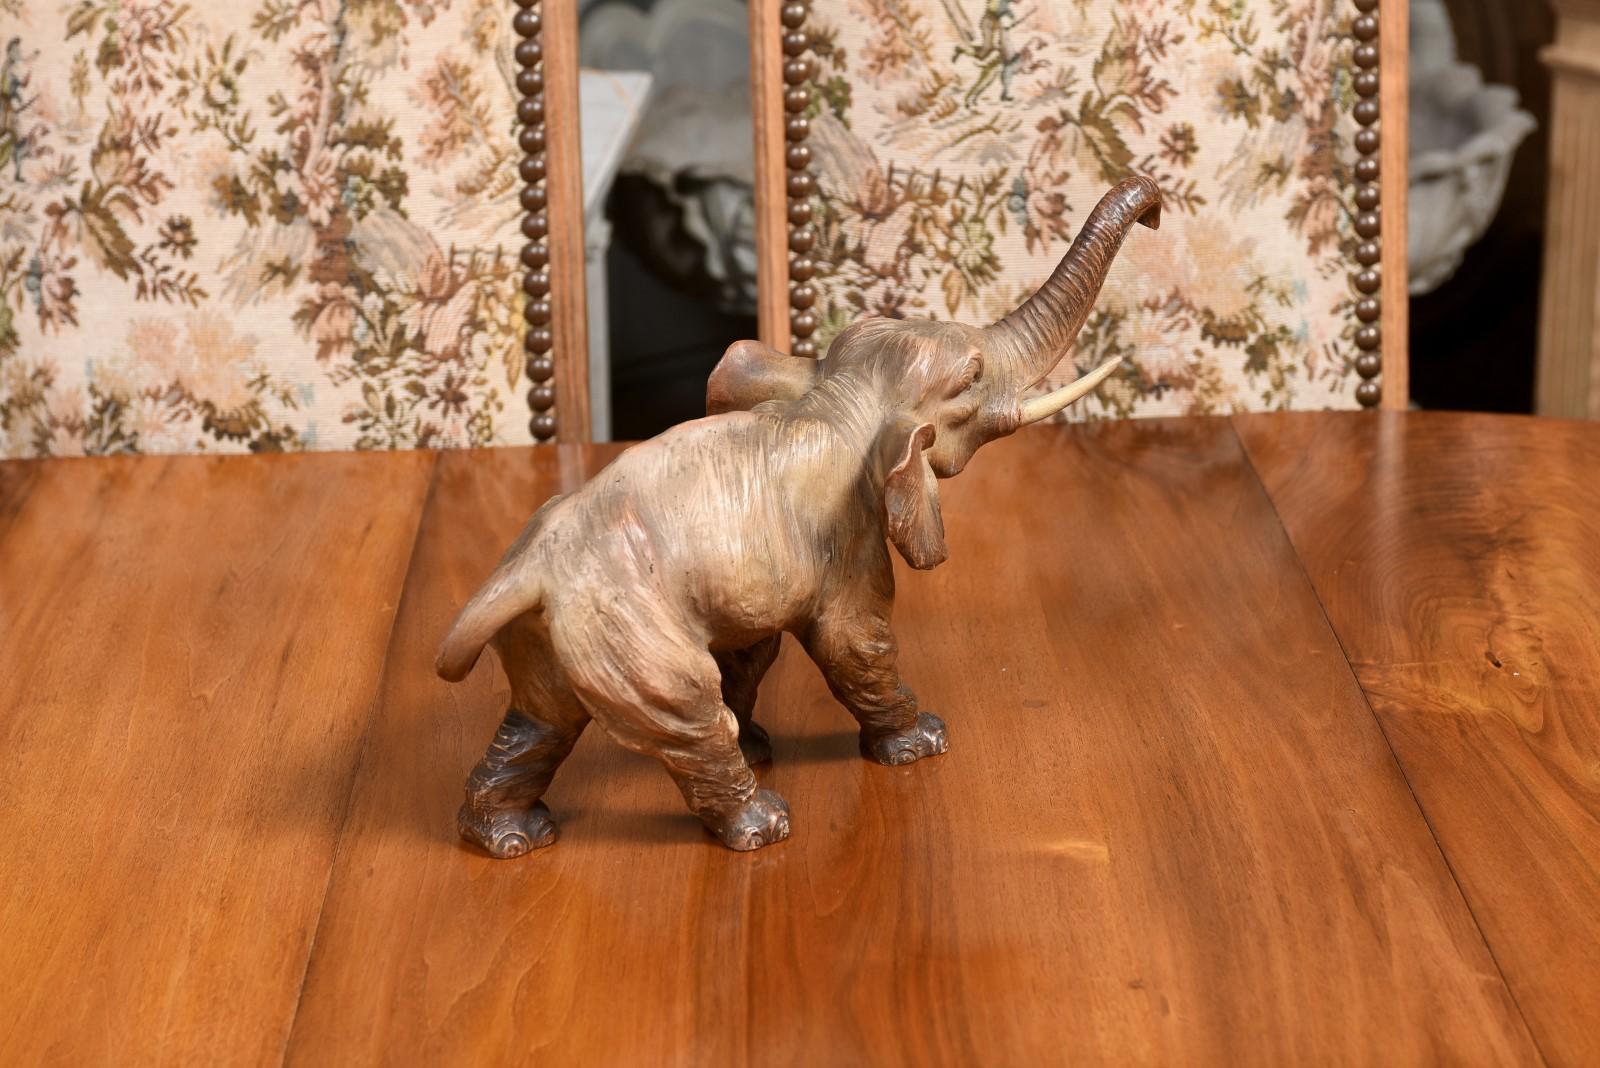 French 19th Century Terracotta Sculpture Depicting a Walking Asian Elephant For Sale 1